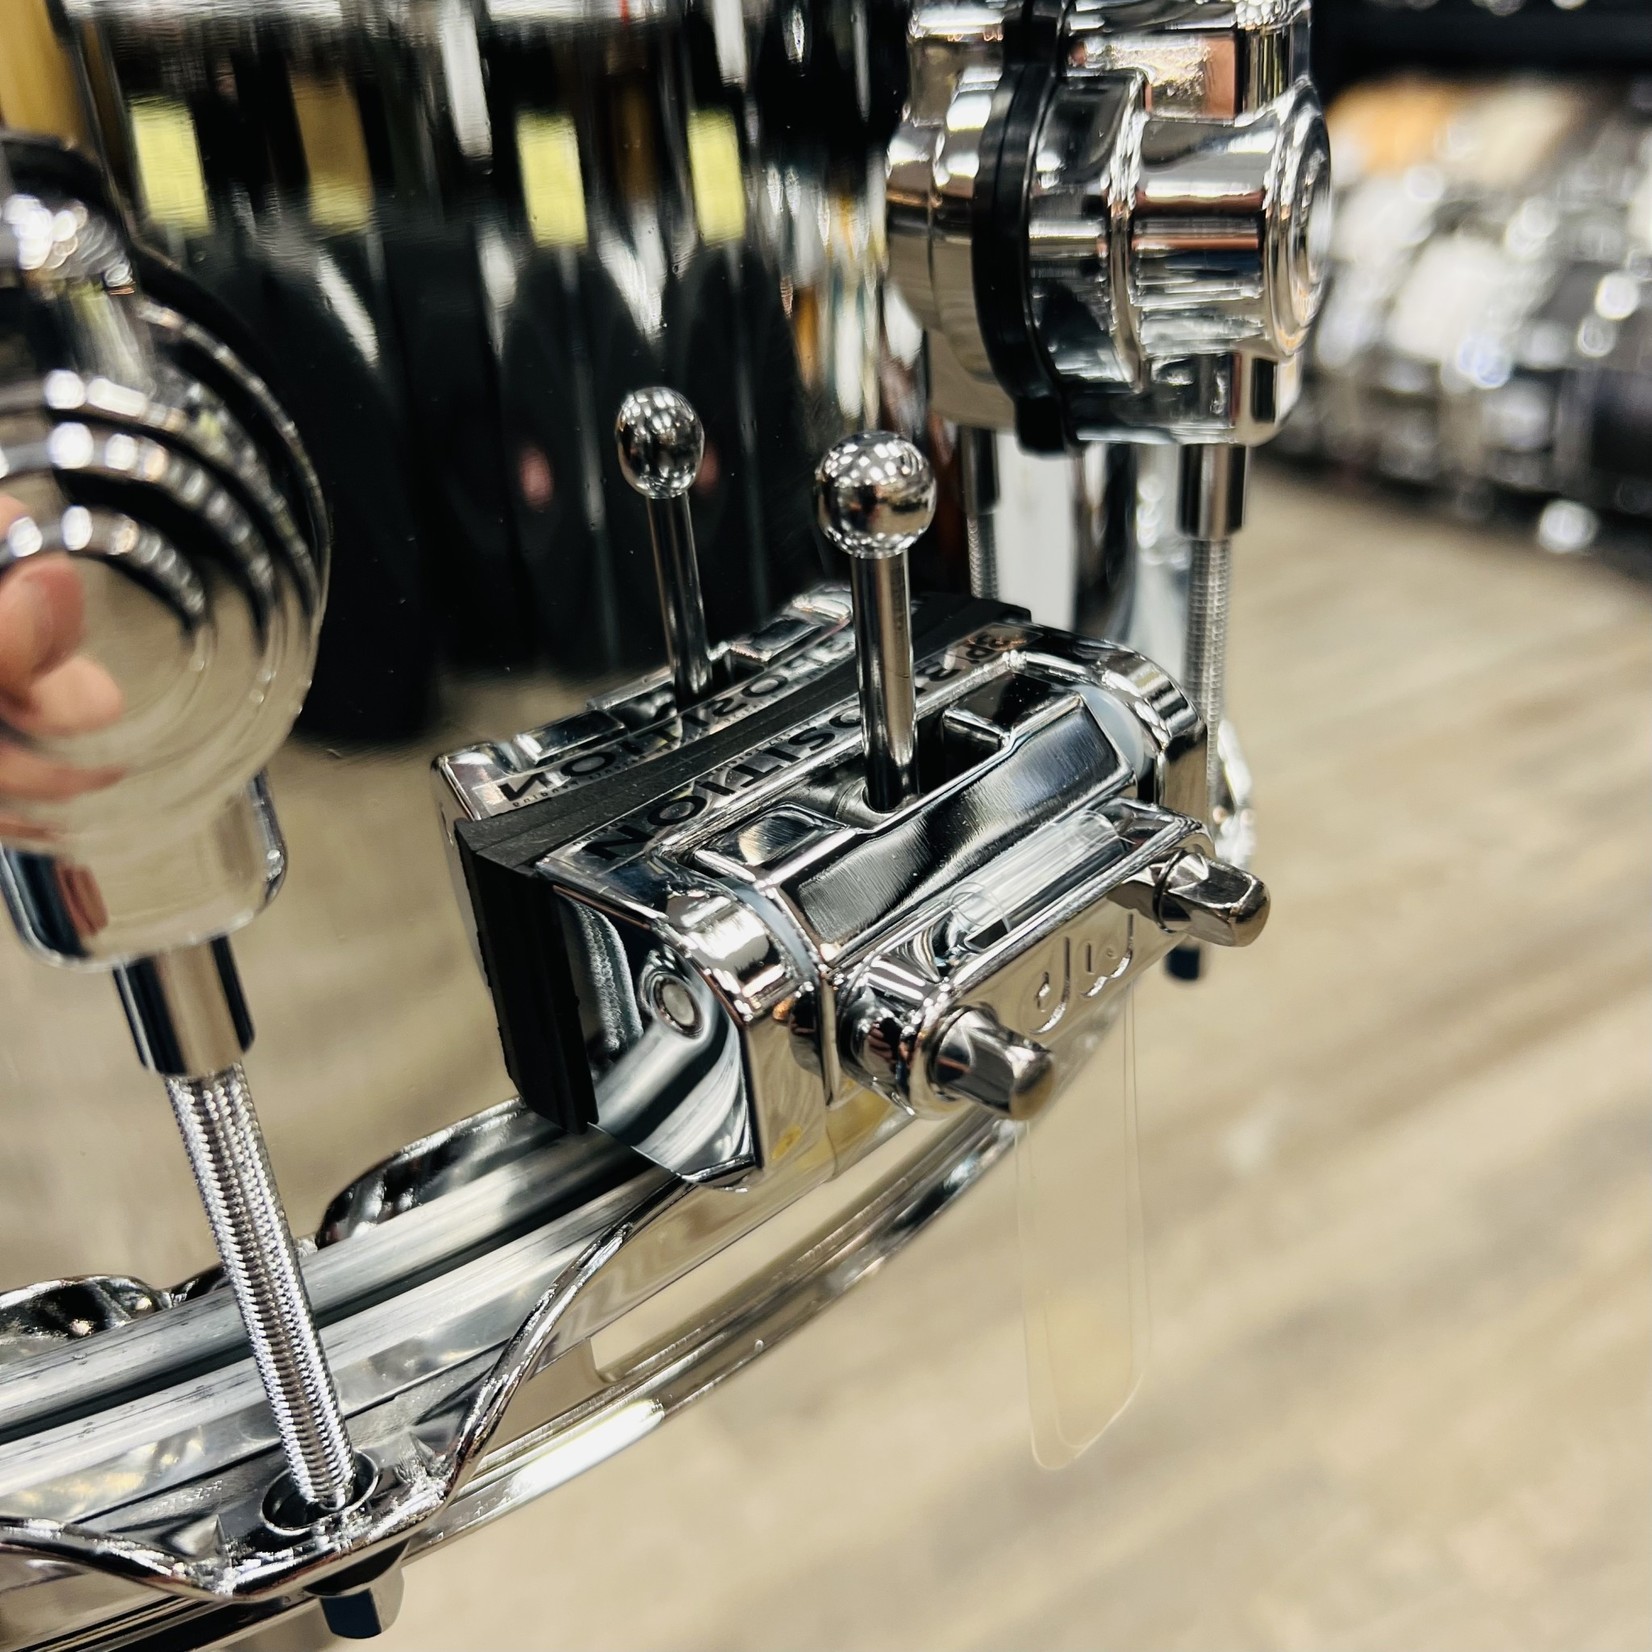 DW DW Performance Series 6.5x14" Chrome Over Steel Snare Drum